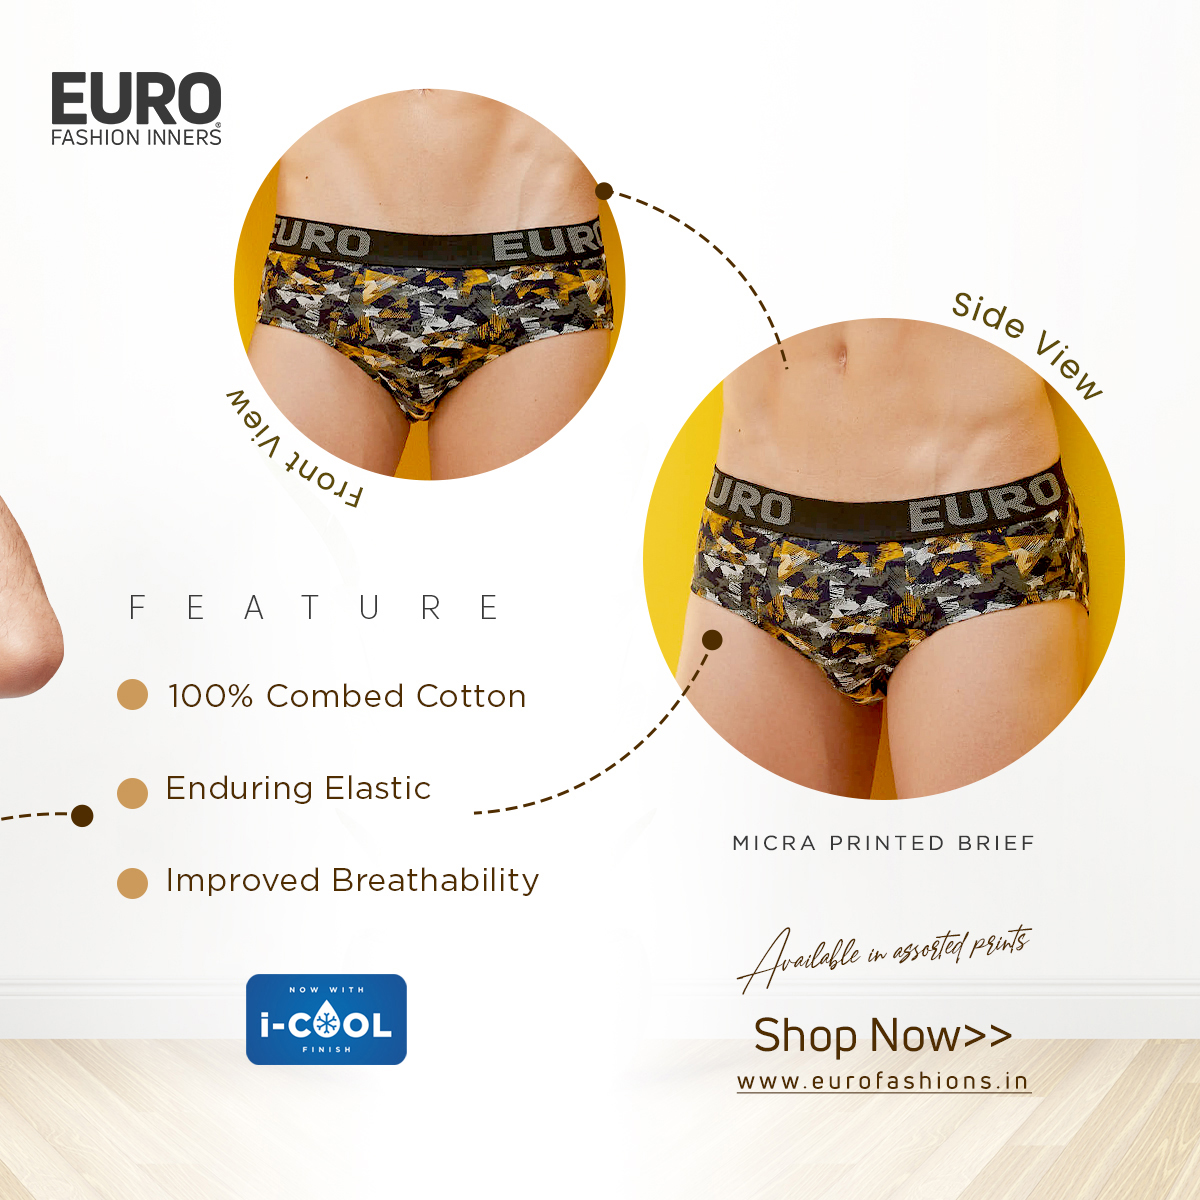 Euro Fashions on X: EURO FASHION INNERS offers The Best in Men's Printed  Brief style underwear. Shop MICRA PRINTED BRIEF @   And @IN :  Also @Flipkart :   #vest #briefs #